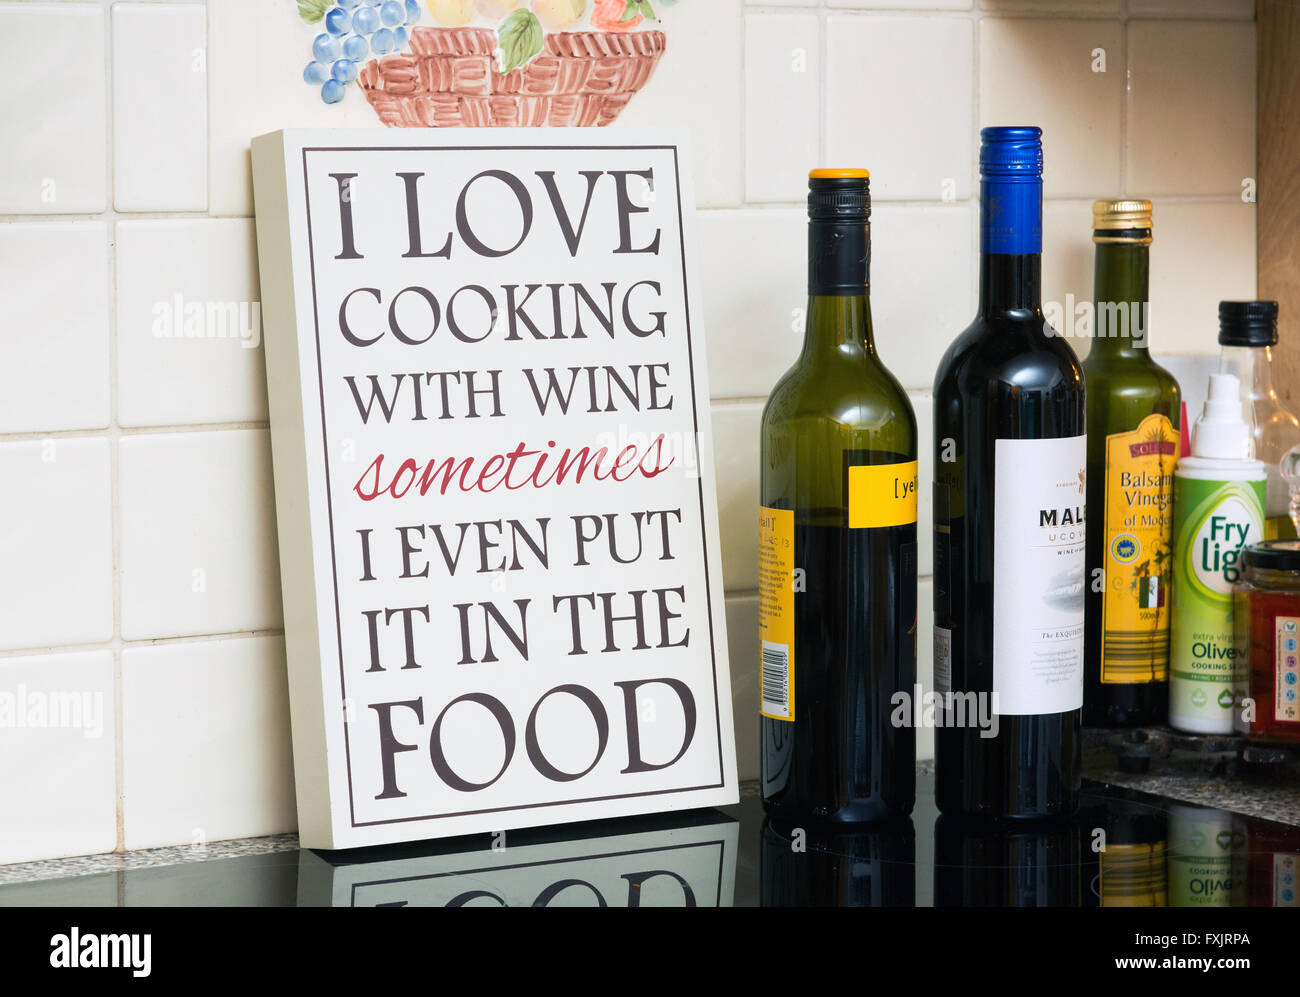 humorous sign about wine and food Stock Photo